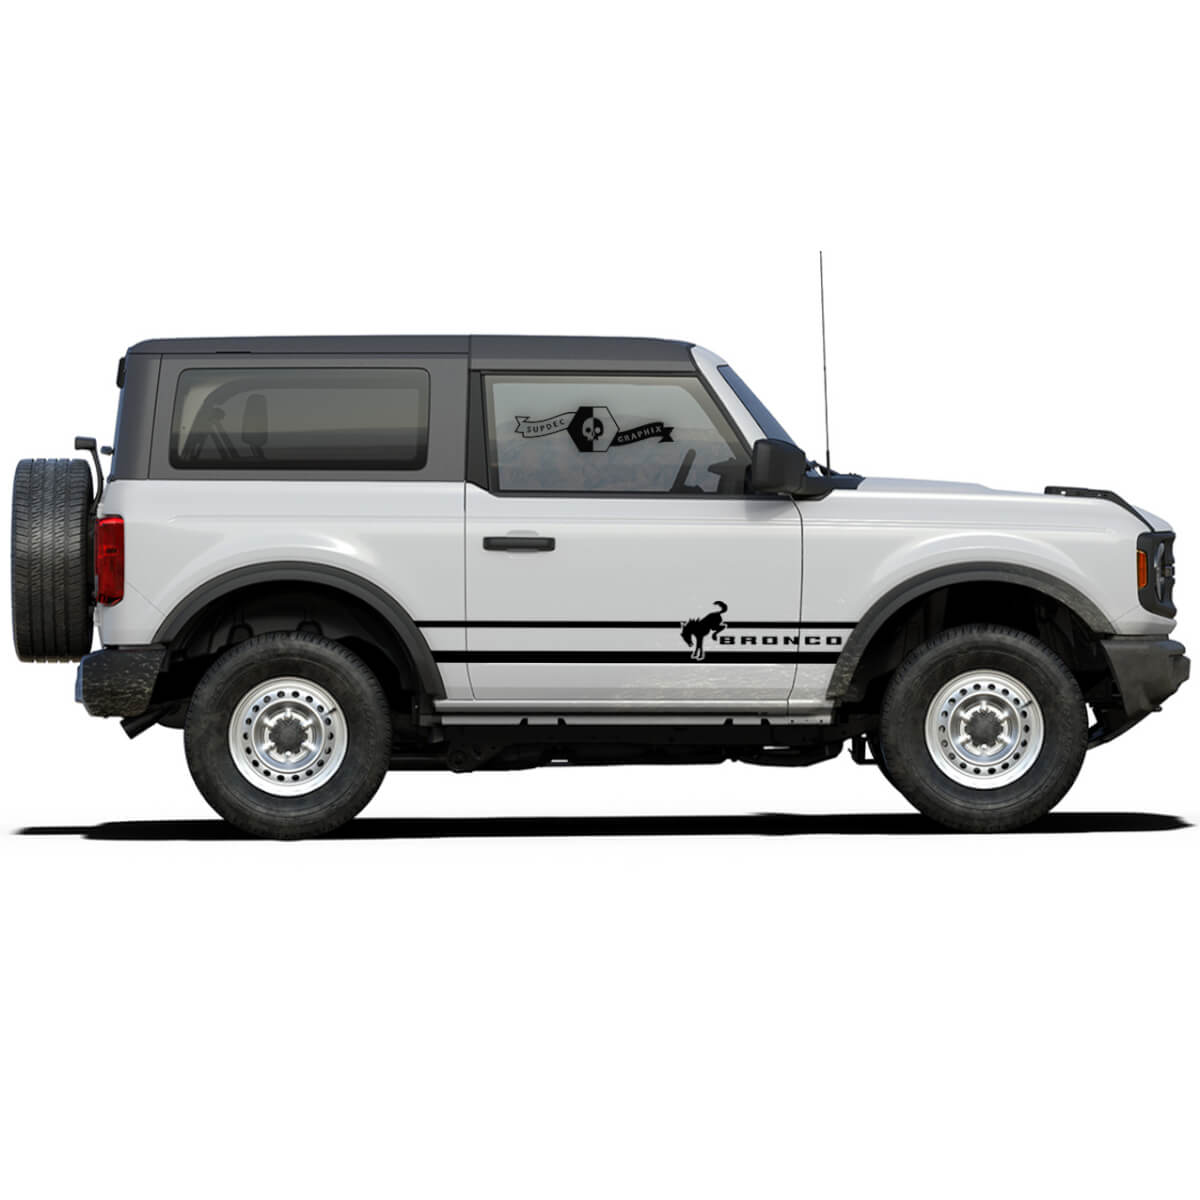 2 Bronco Logo Horse Stallion Side Stripe 2 Doors Decals Splitted Stickers for Ford Bronco 2021